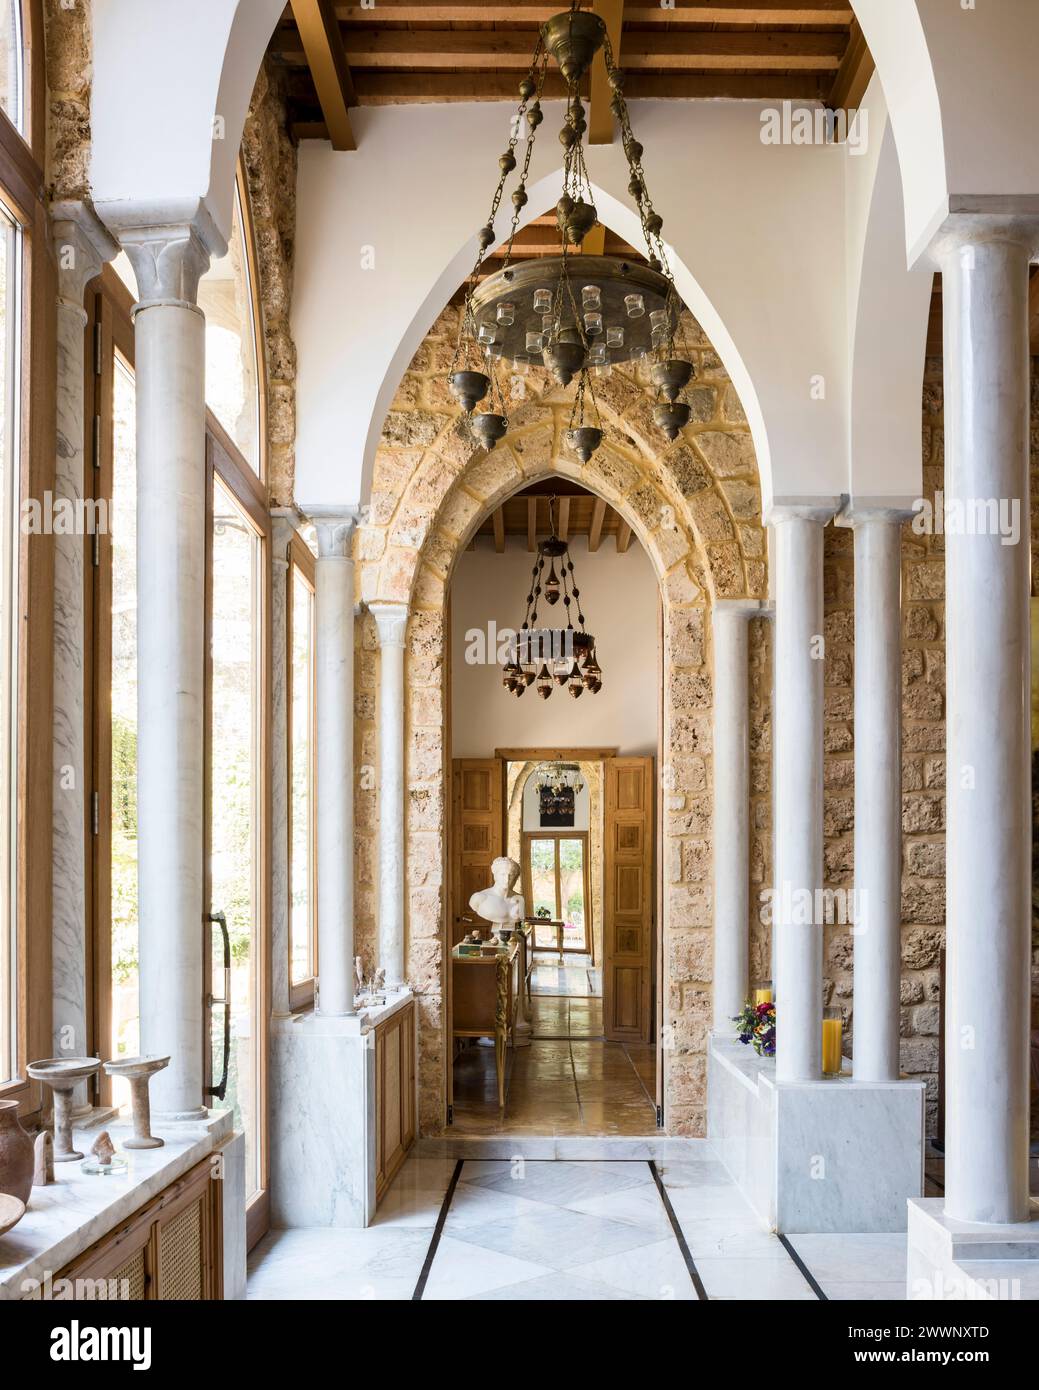 Colonnade of pillars and exposed stone doorway in luxury apartment in Beirut, Lebanon. Stock Photo